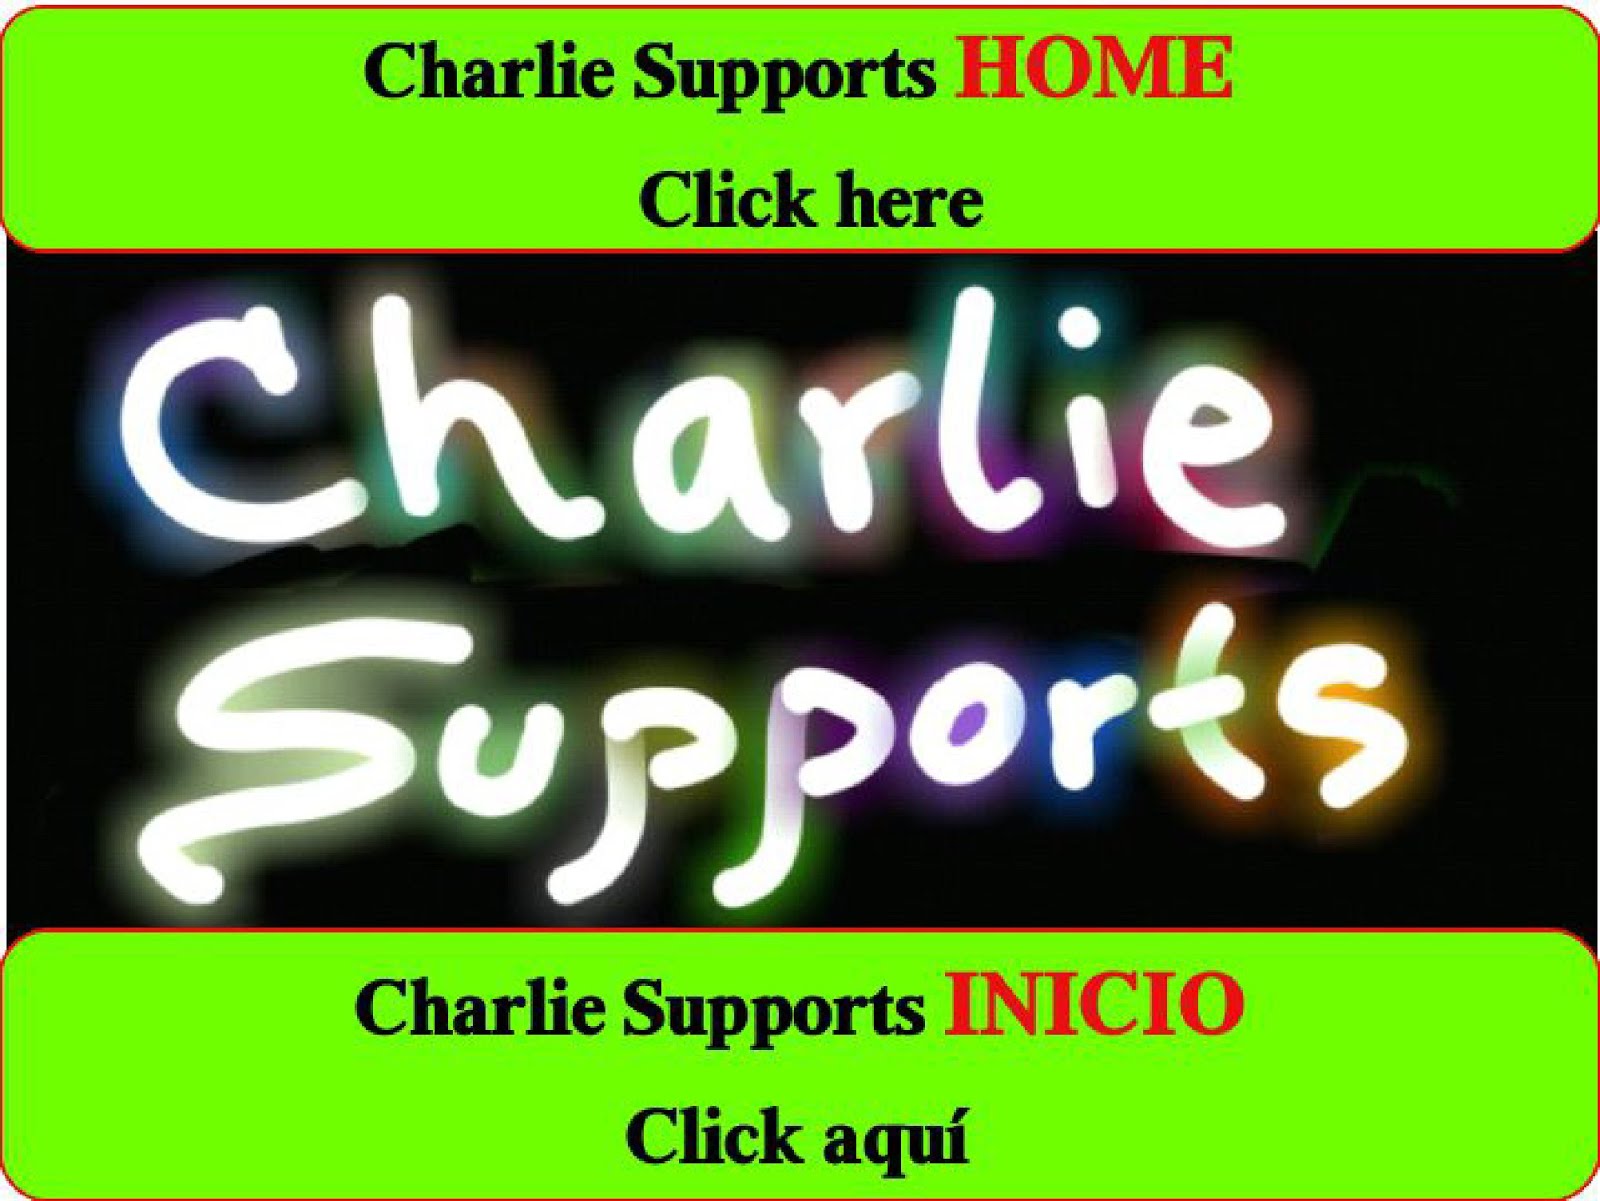 Charlie Supports Home, Click here